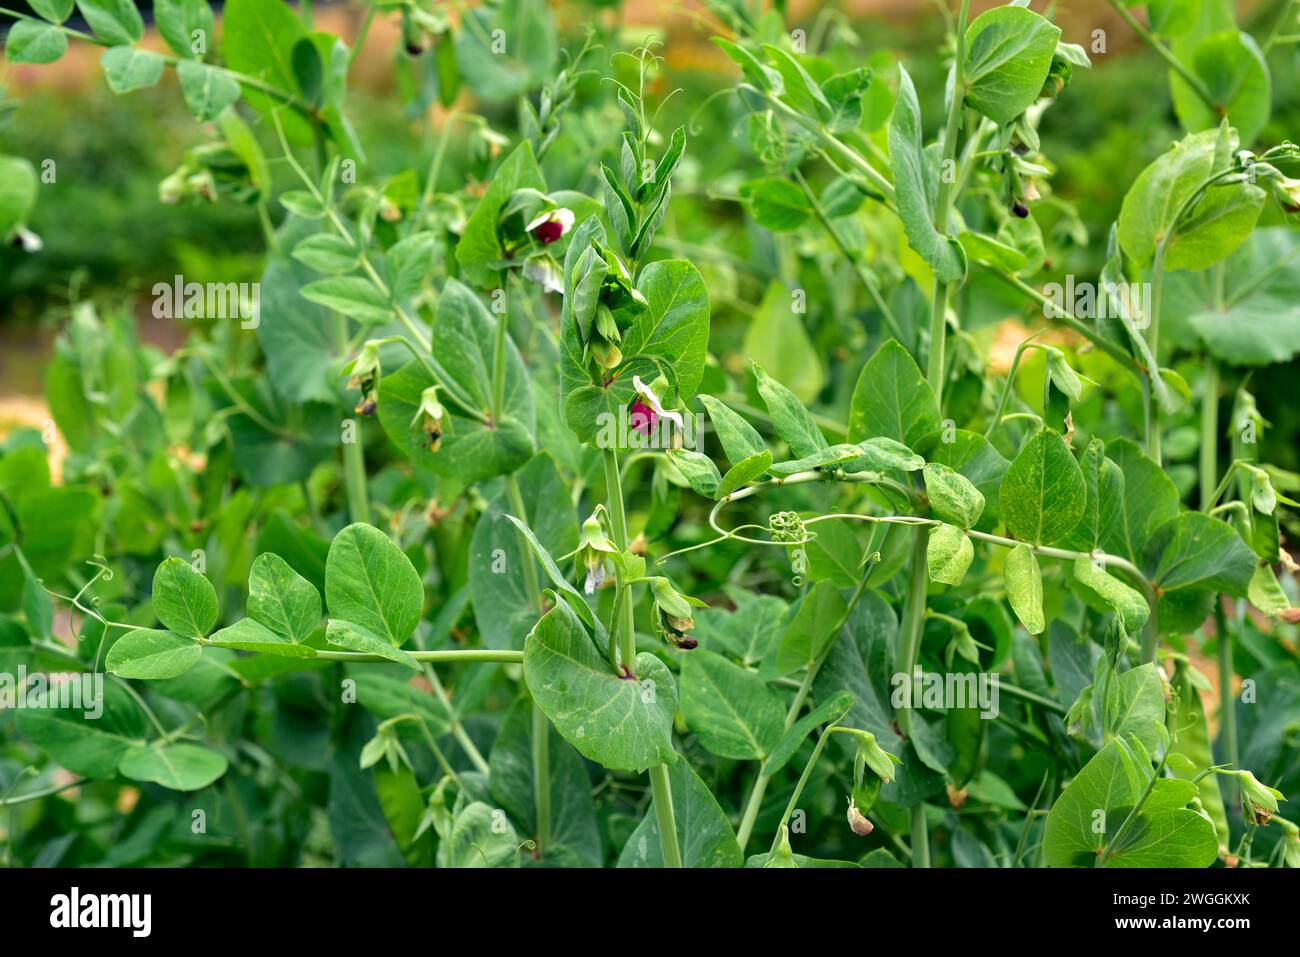 Snow pea or mangetout (Pisum sativum saccharatum) is an annual herb cultivated for its edible unripe fruits. Flowers and fruits detail. Stock Photo